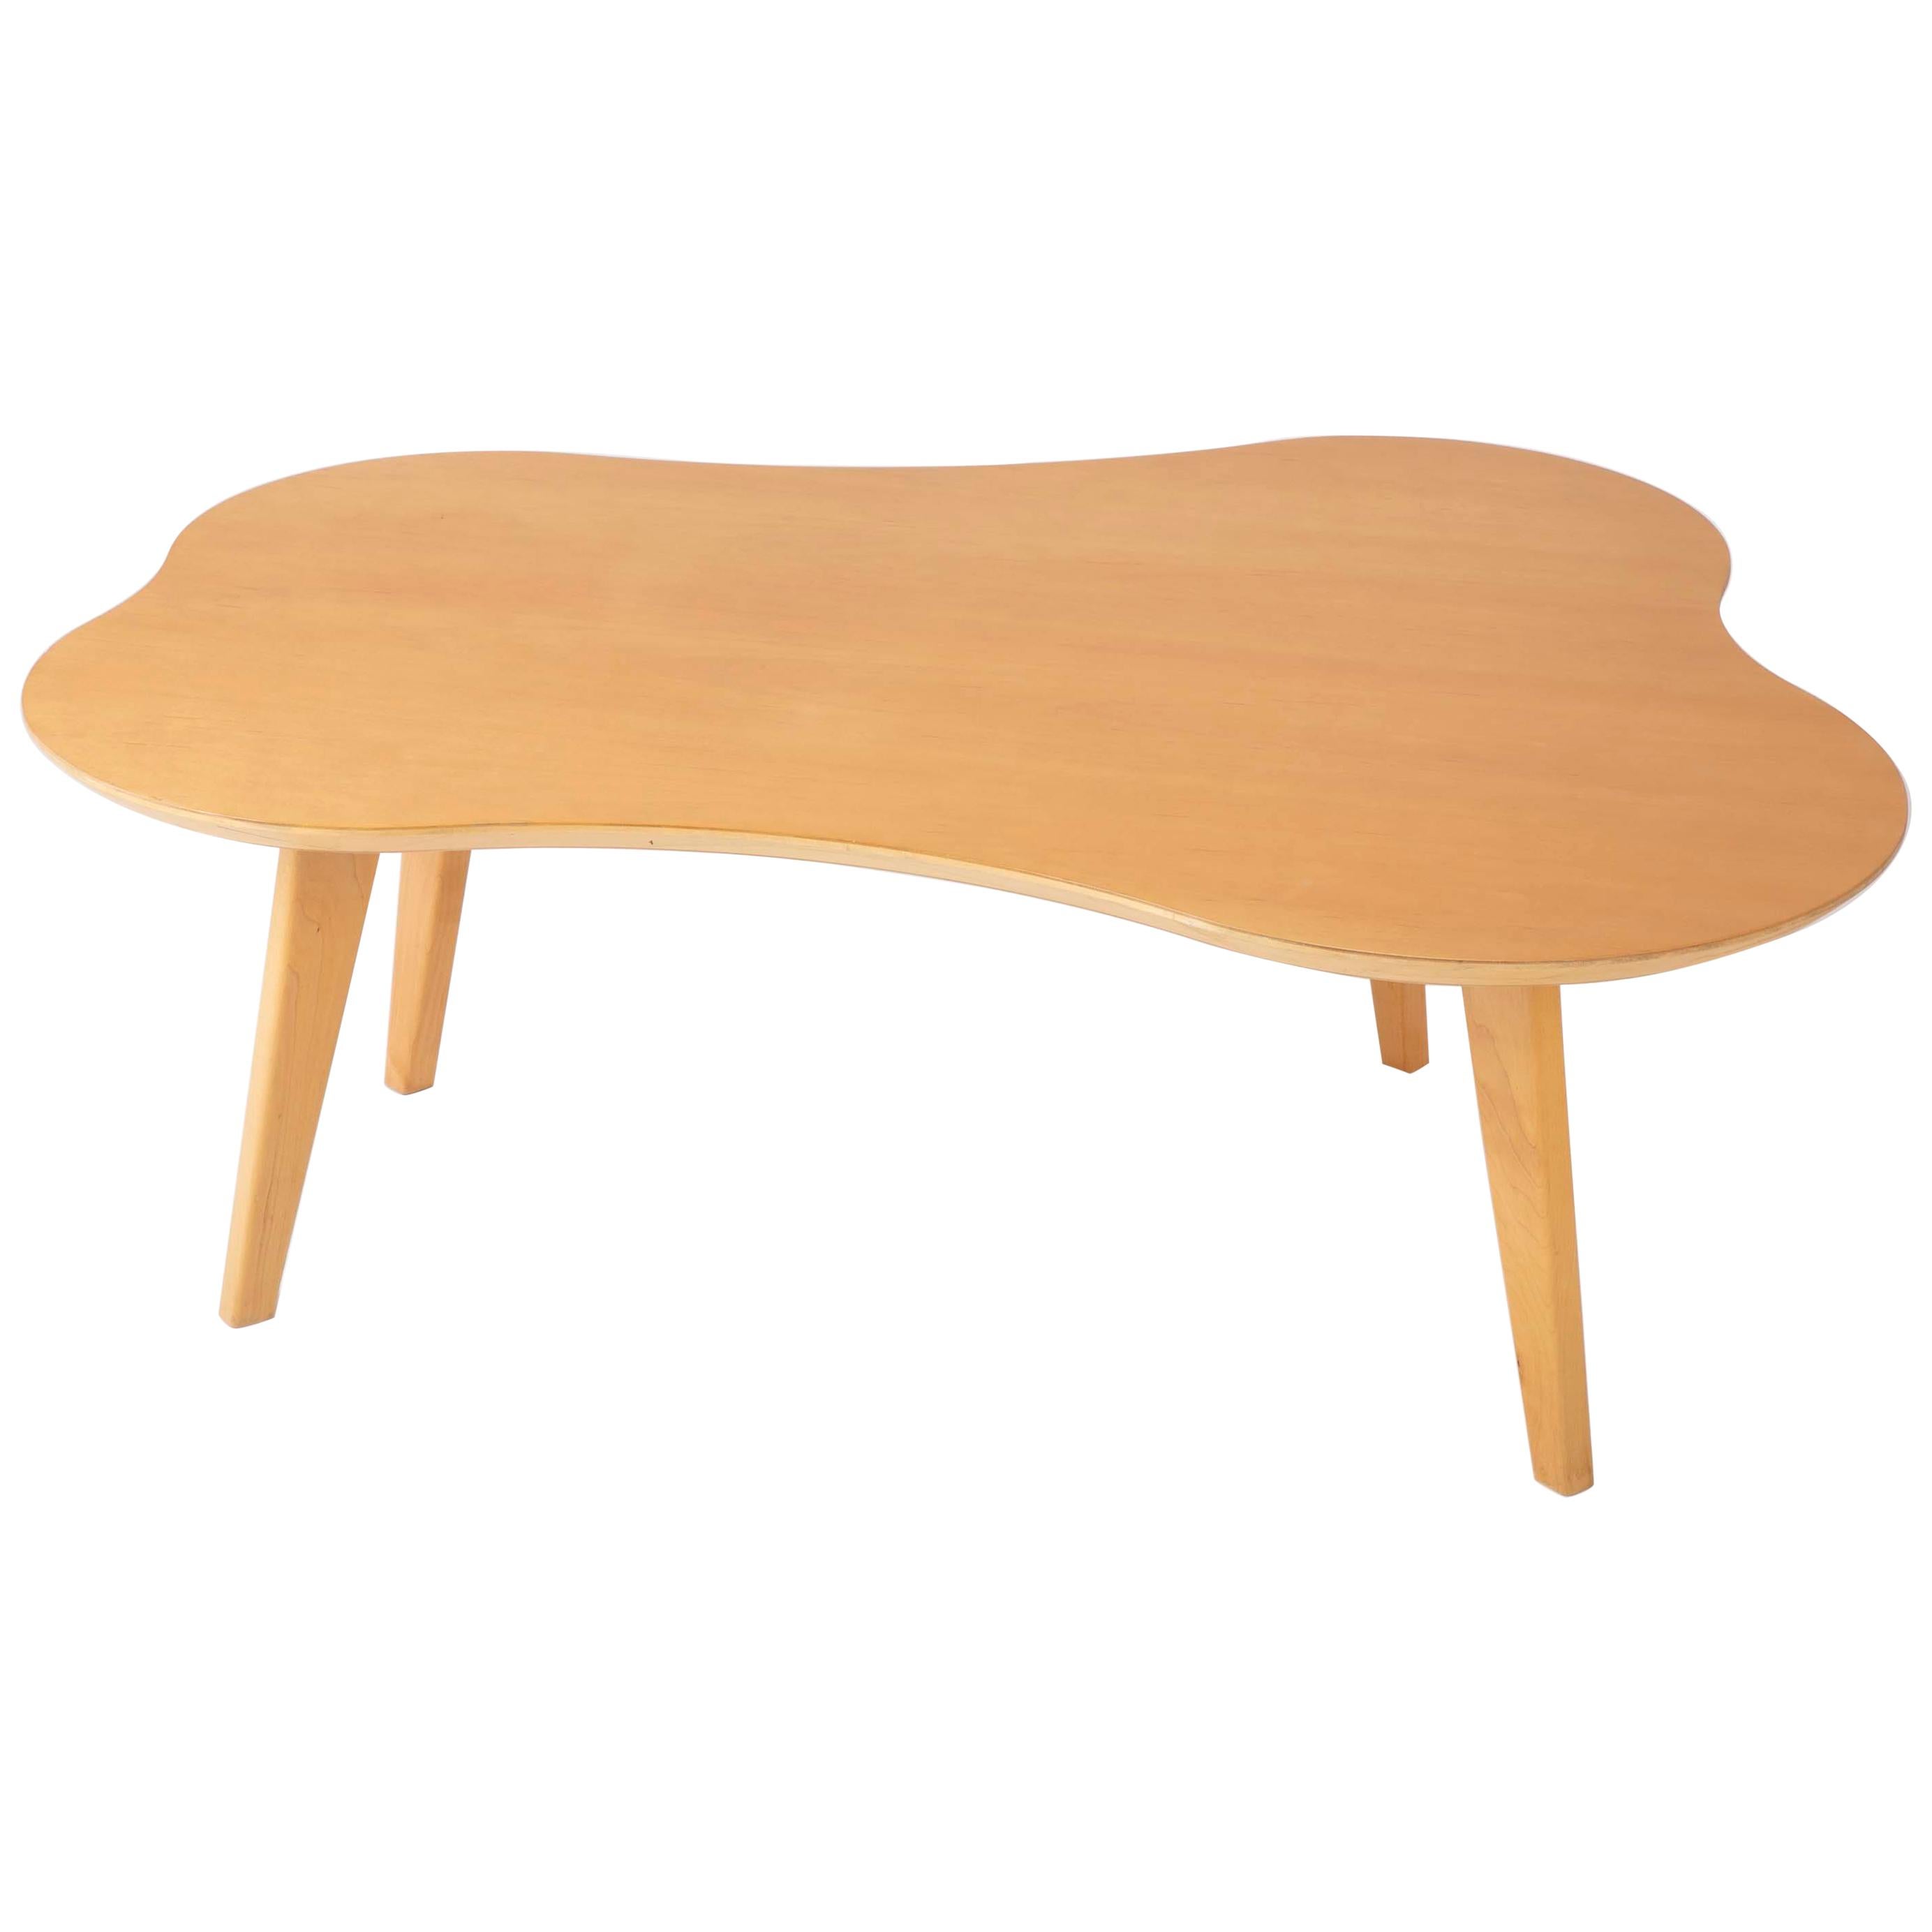 Jens Risom for Knoll "Cloud" Coffee Table in Maple